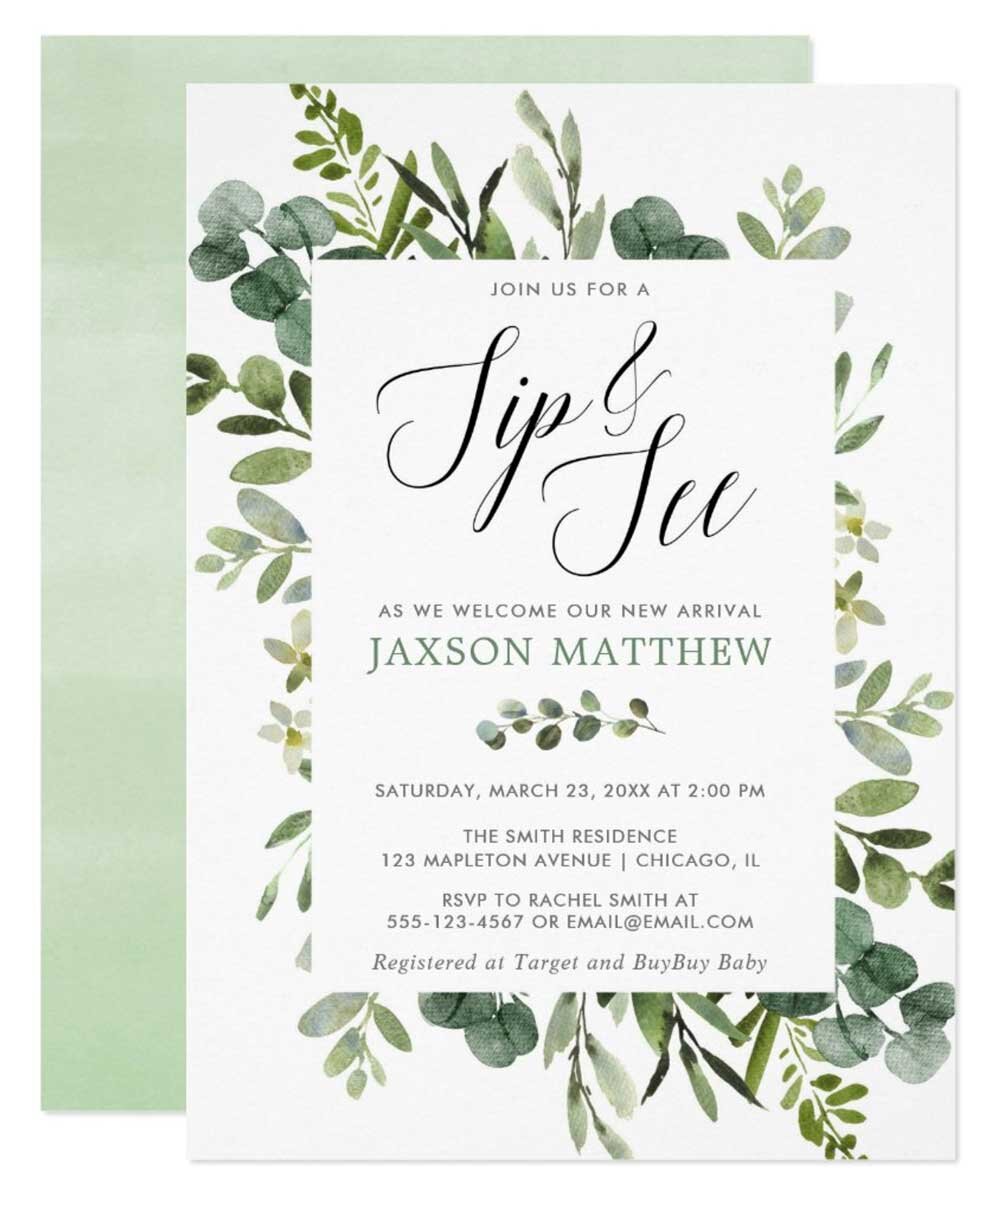 Sip and See Invitation